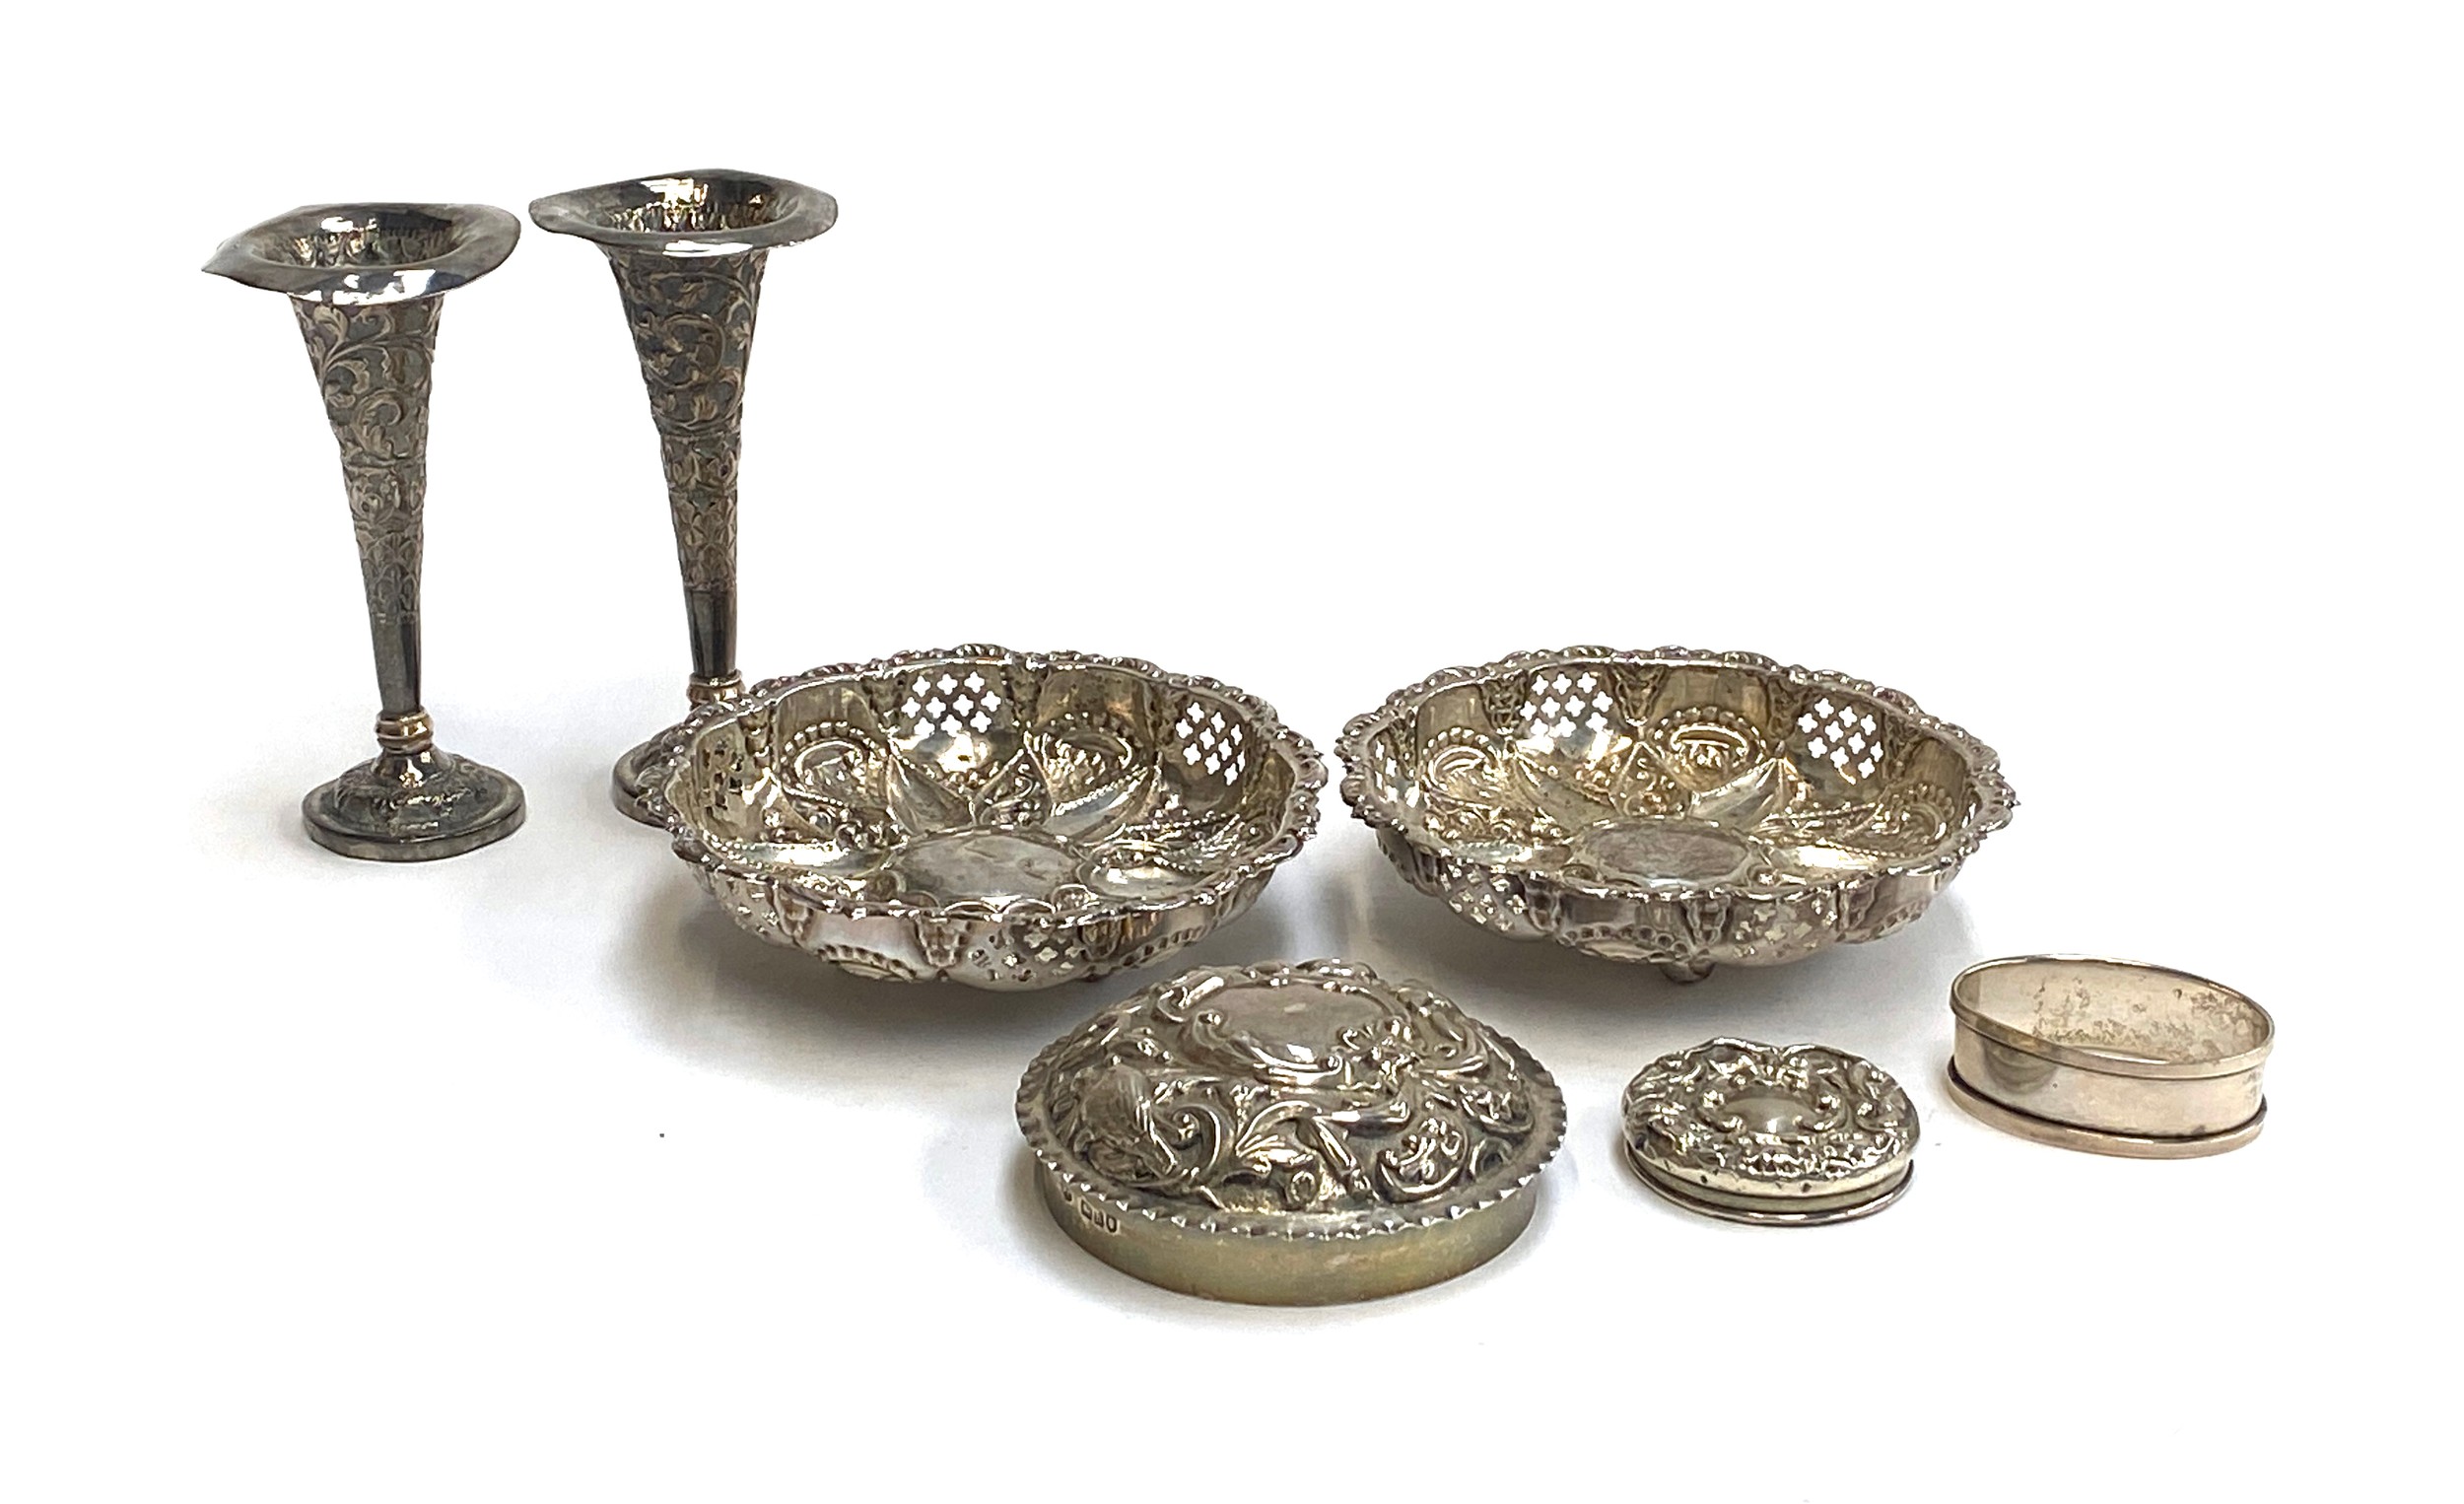 A pair of hallmarked silver chased and pierced bonbon dishes; two chased silver lids; silver